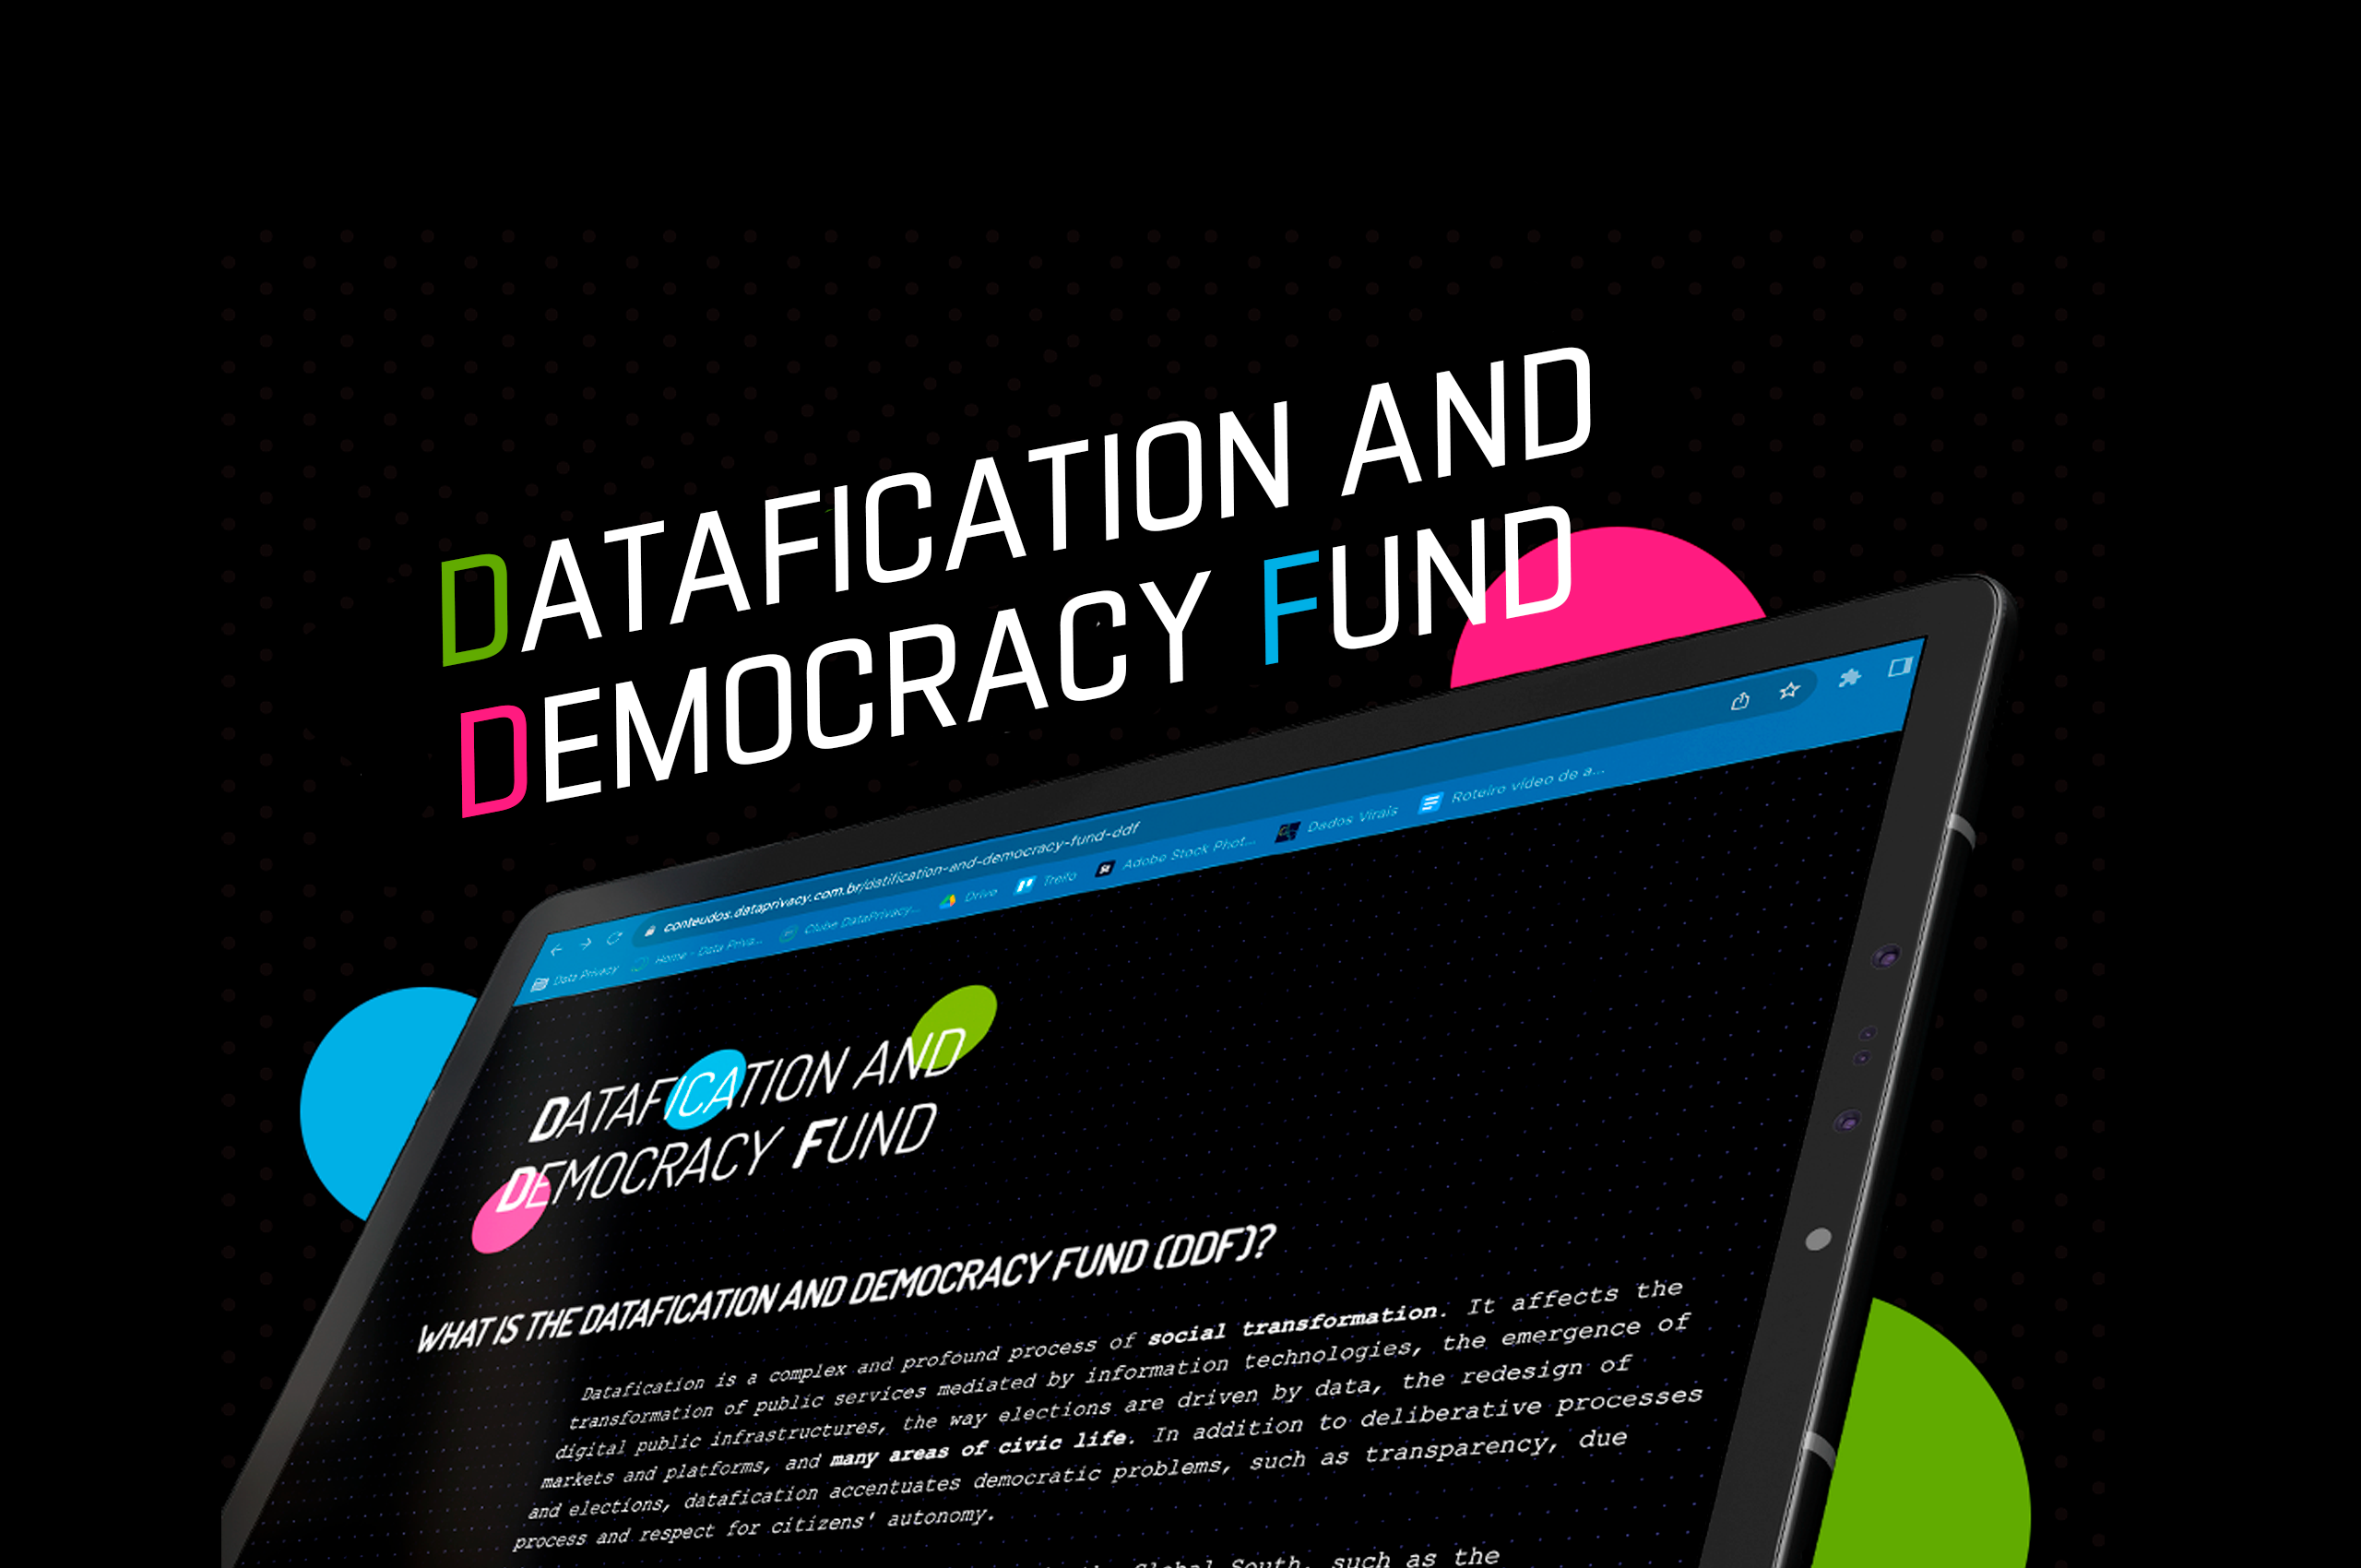 http://Data%20Privacy%20Brasil,%20Paradigm%20Initiative%20and%20Aapti%20Institute%20announce%20the%20launch%20of%20the%20“Datafication%20and%20Democracy%20Fund”